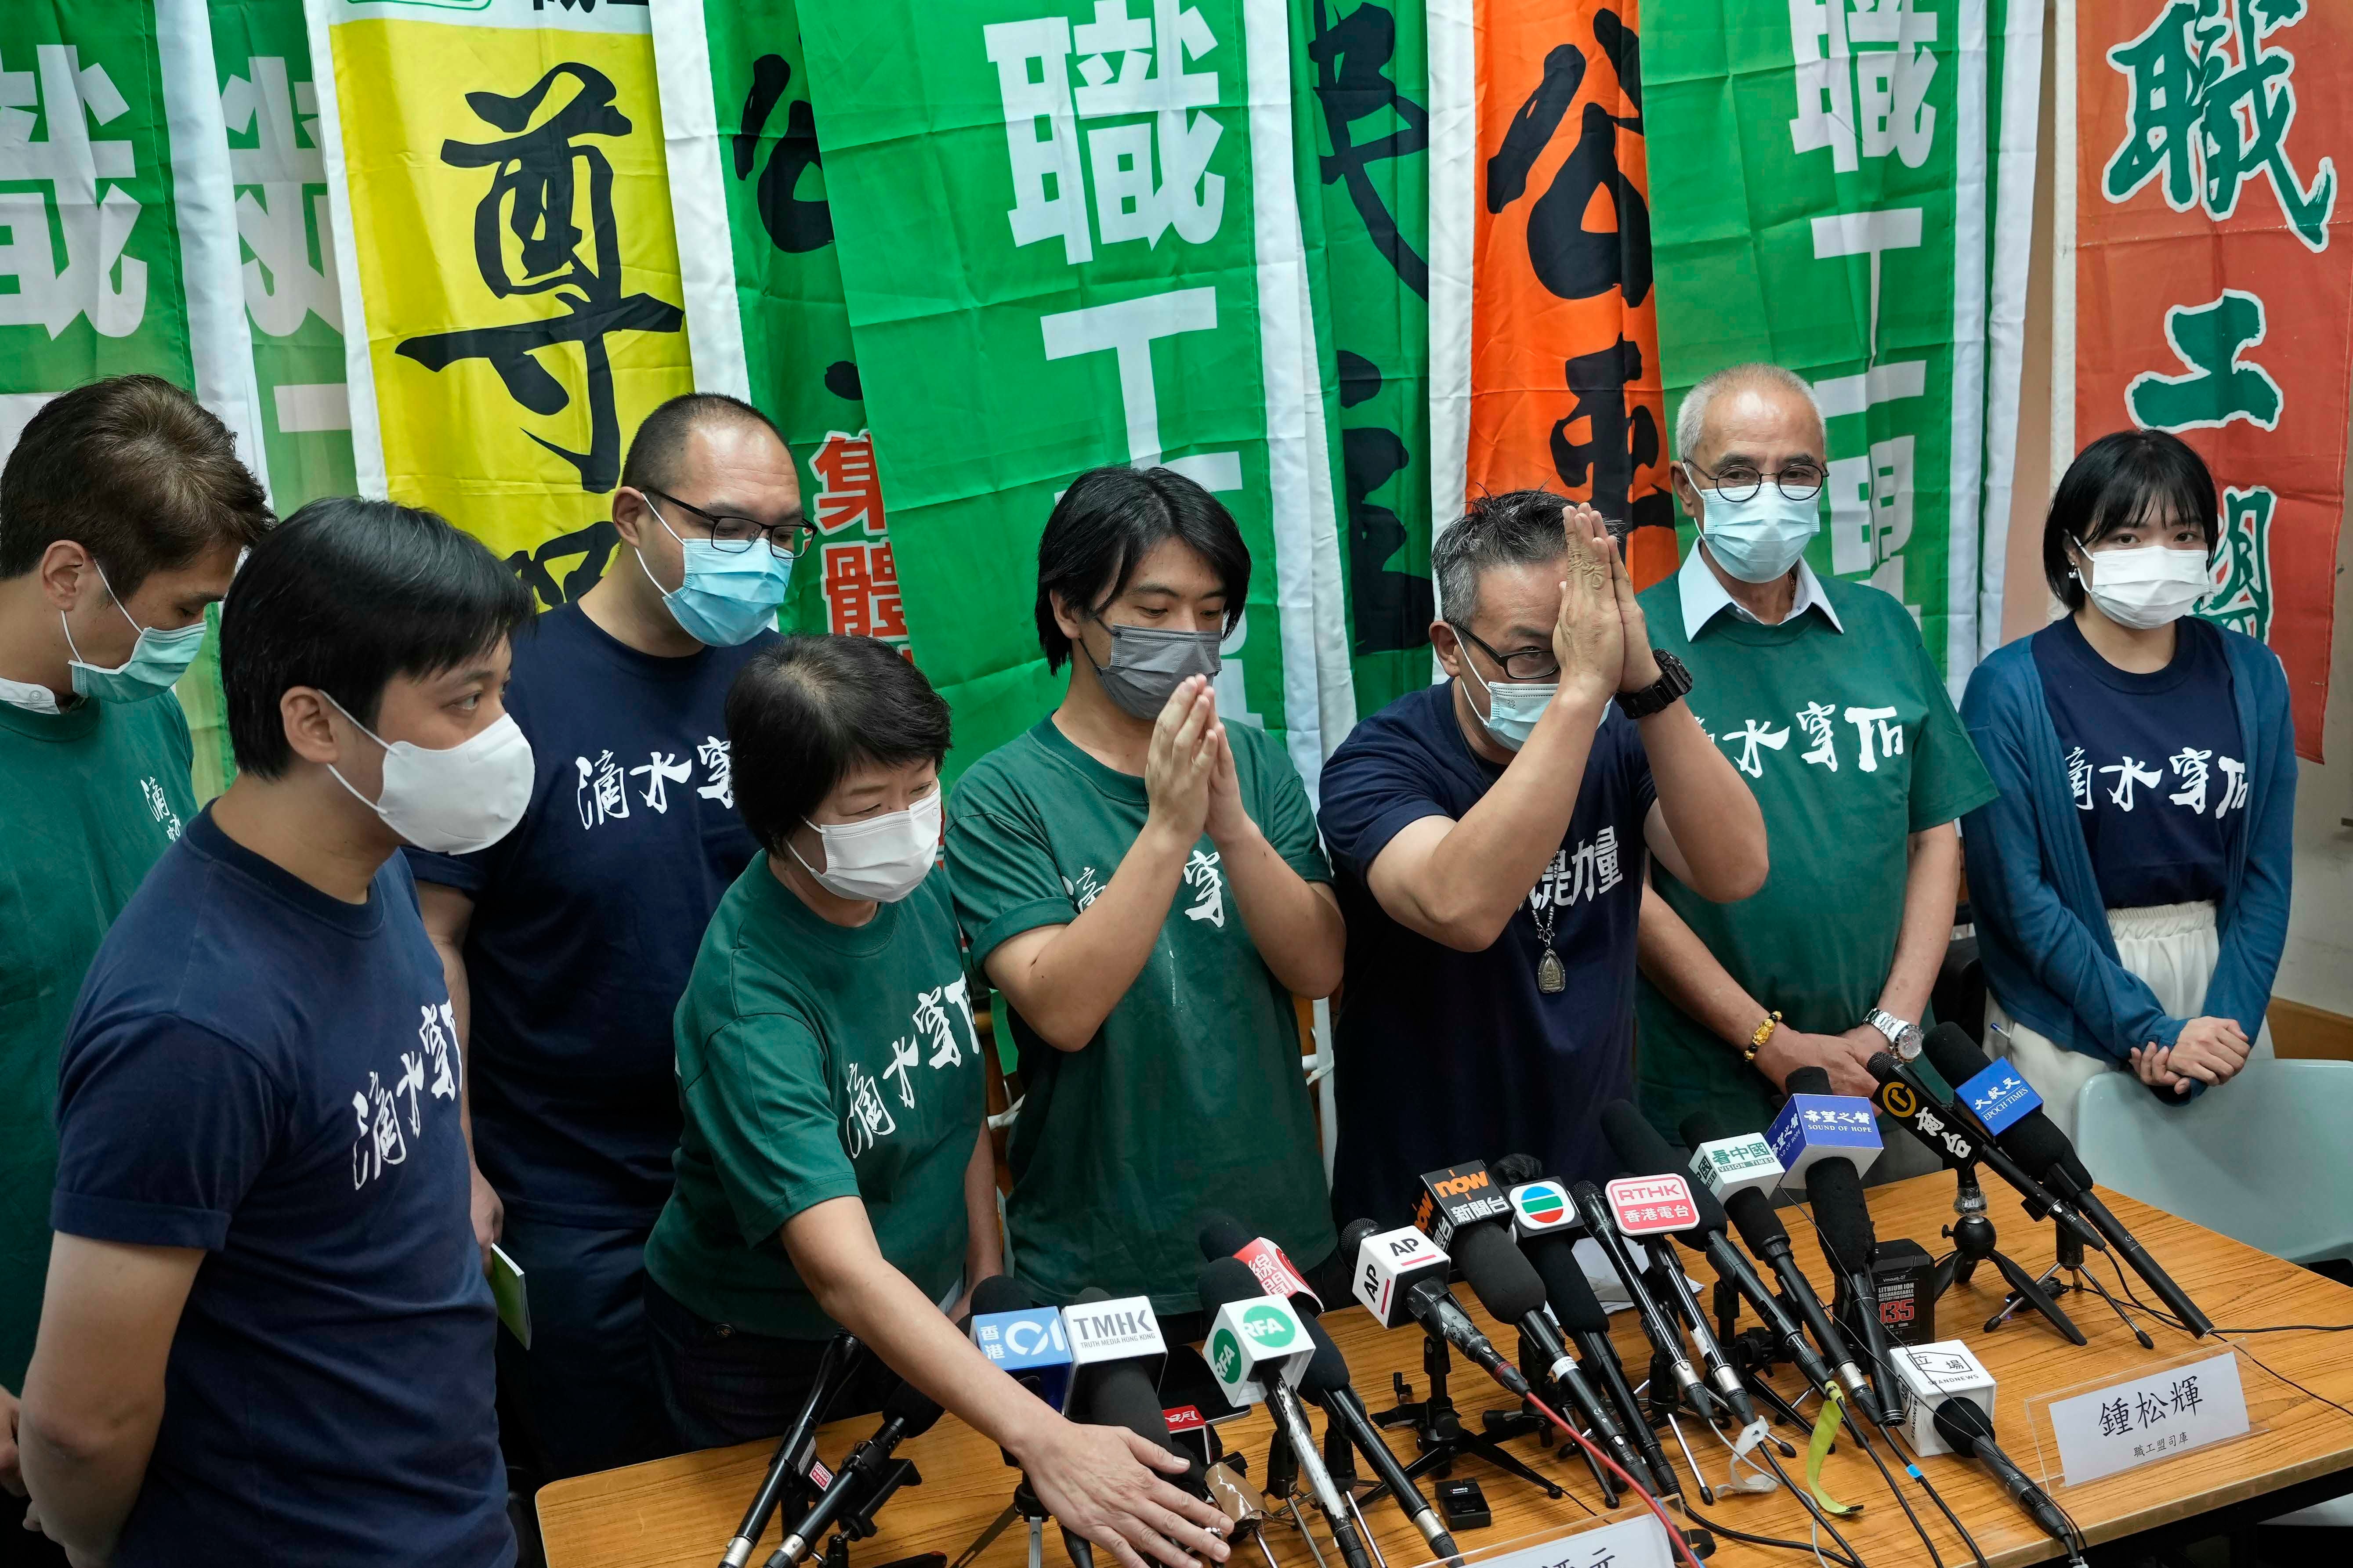 Hong Kong Confederation of Trade Unions President Joe Wong Nai-yuen, third from right, with other members before a news conference on the possibility of disbanding, Hong Kong